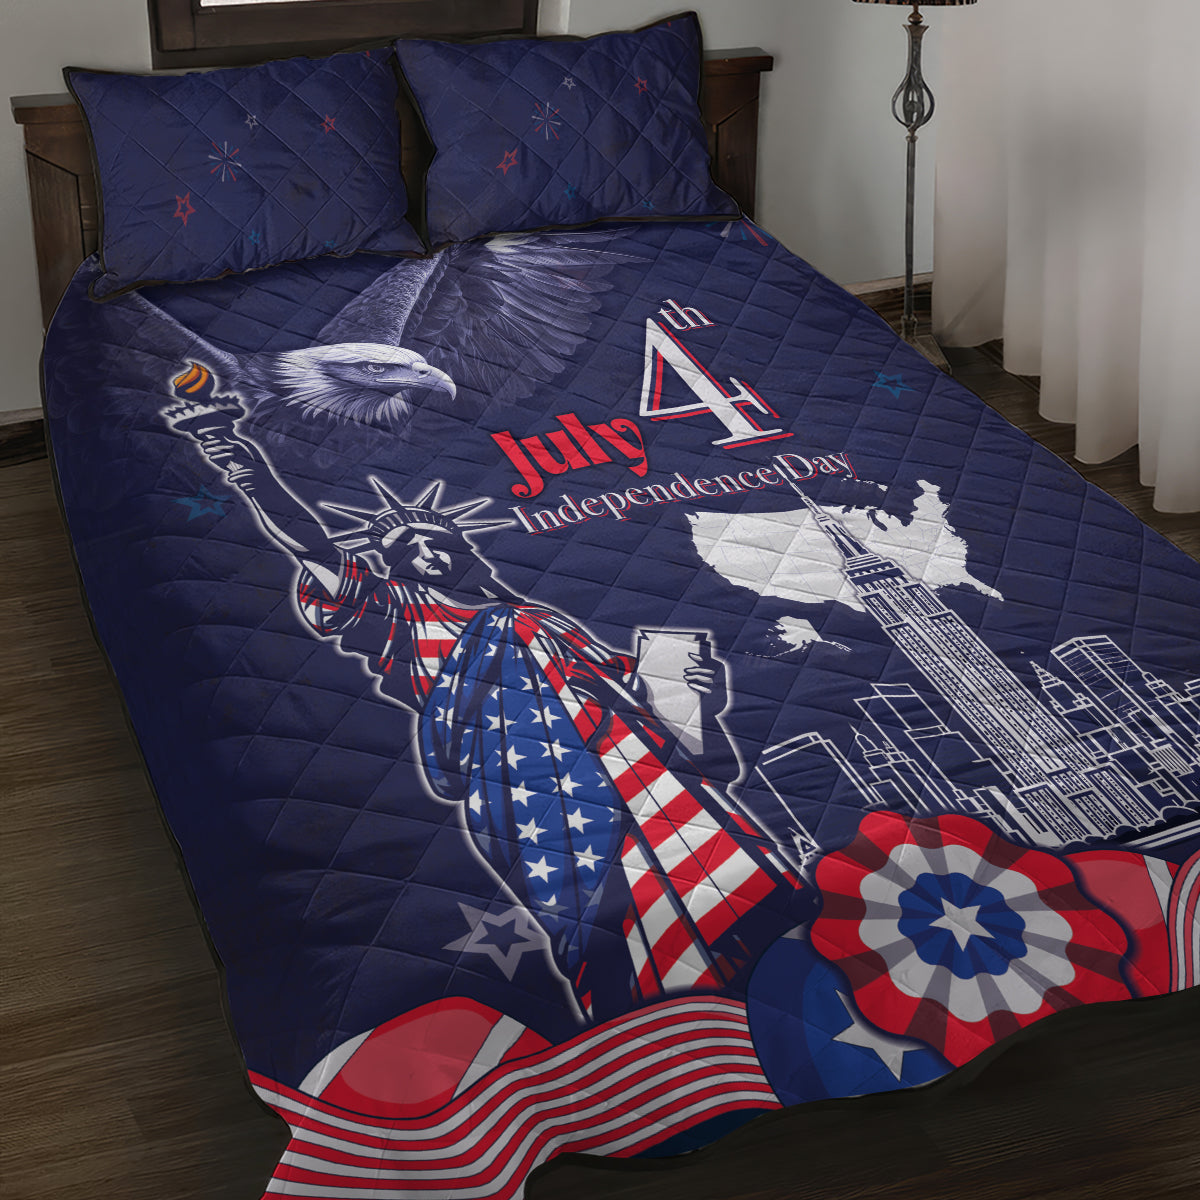 United States Independence Day Quilt Bed Set Freedom 4th Of July Navy Version